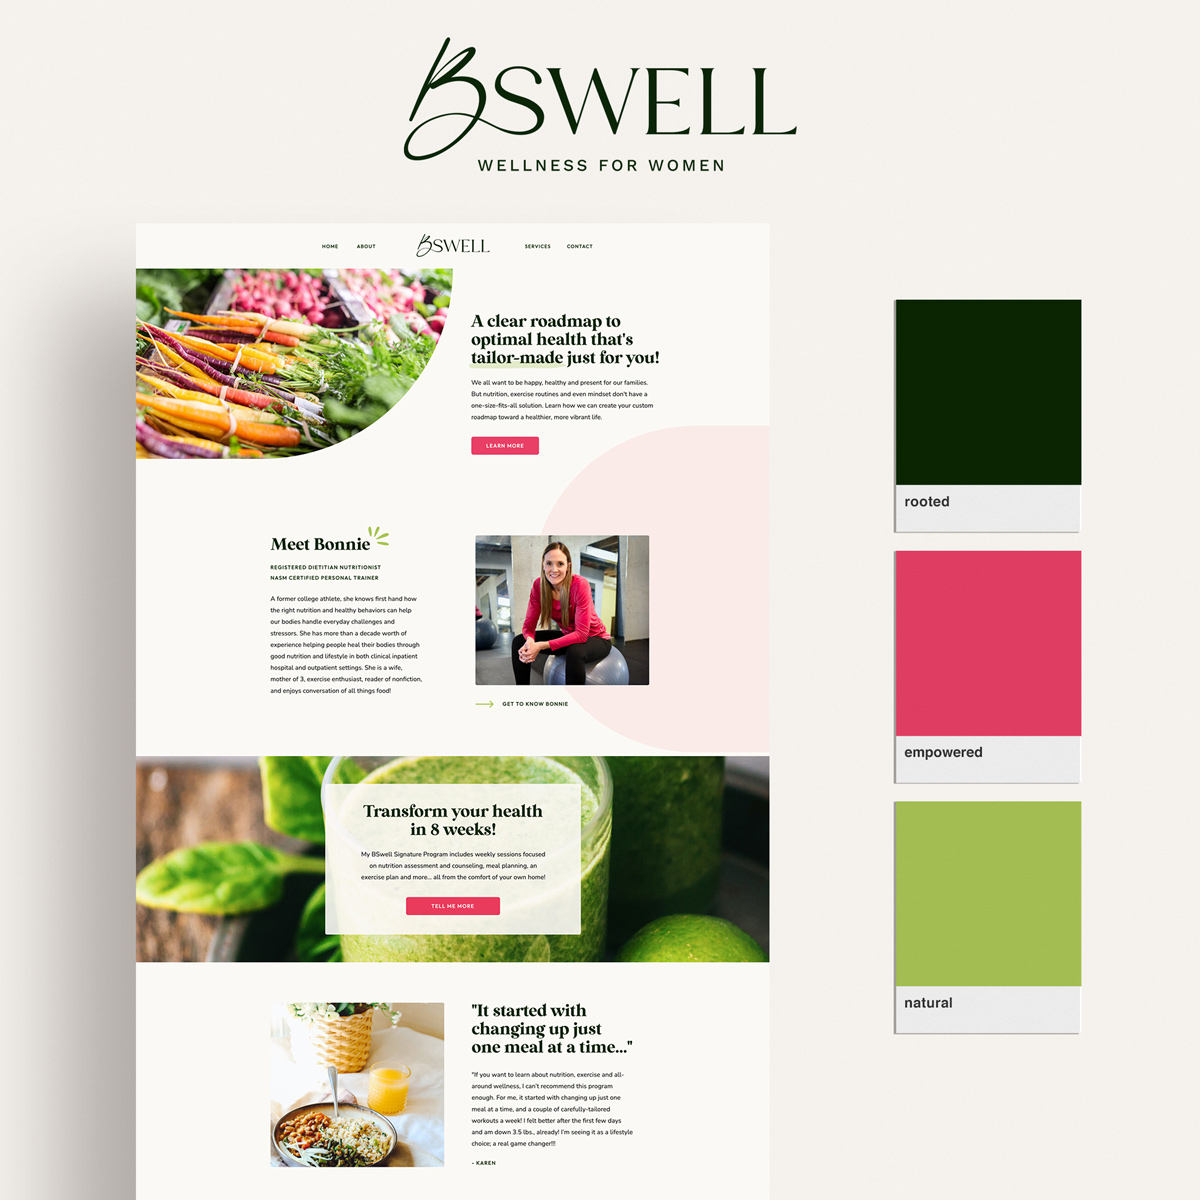 new branding and website design for wellness coach bswell, showing homepage design, logo design and new color palette